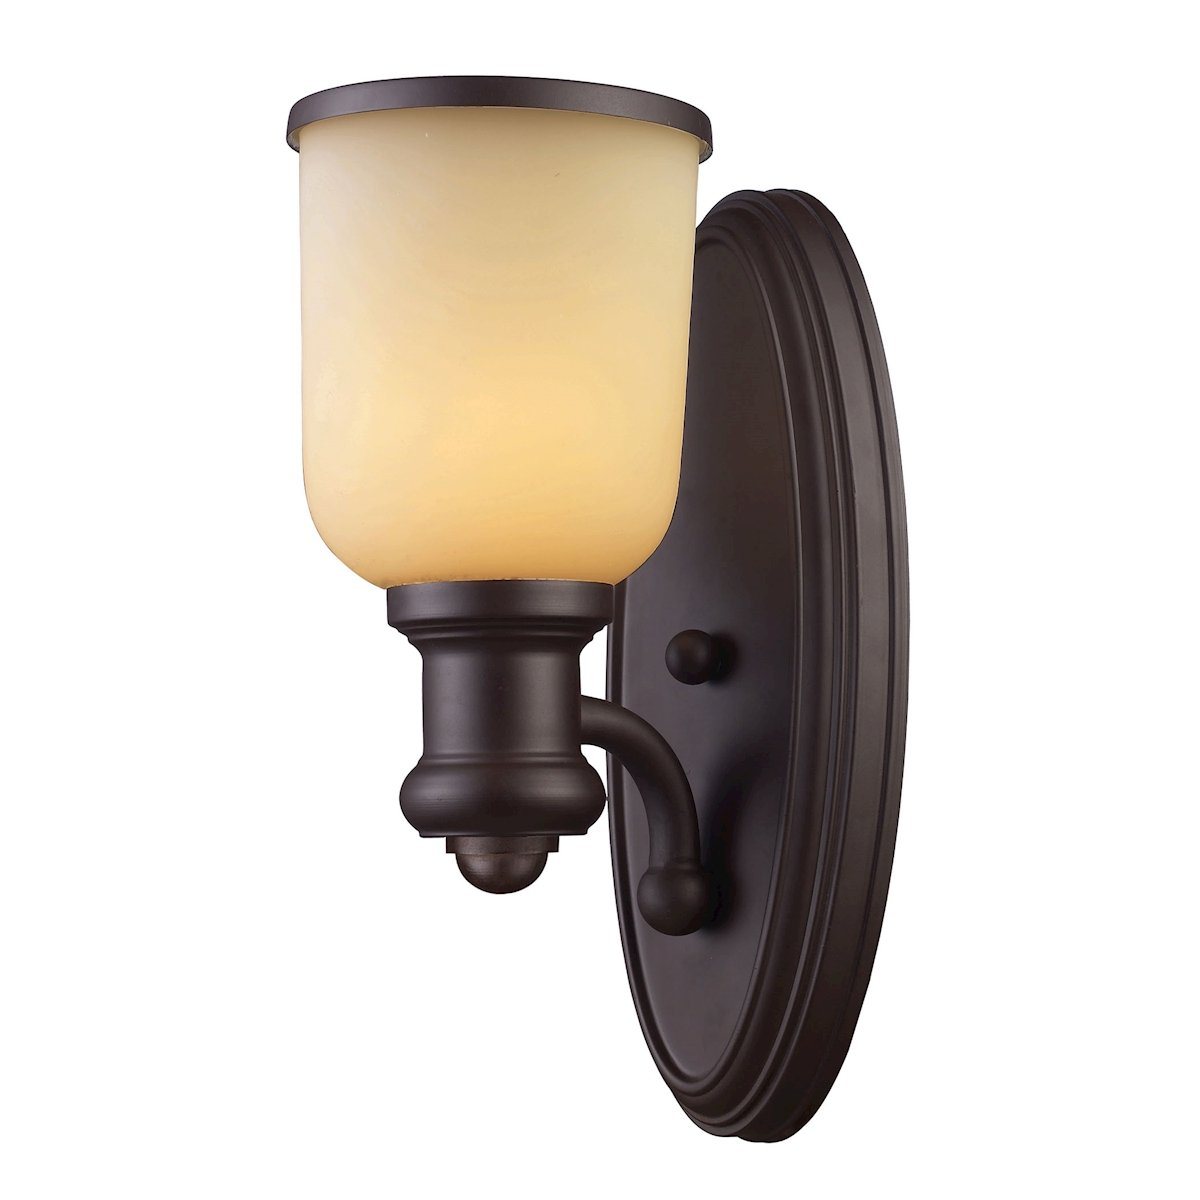 Brooksdale 1 Light Wall Sconce In Oiled Bronze And Amber Glass Wall Sconce Elk Lighting 